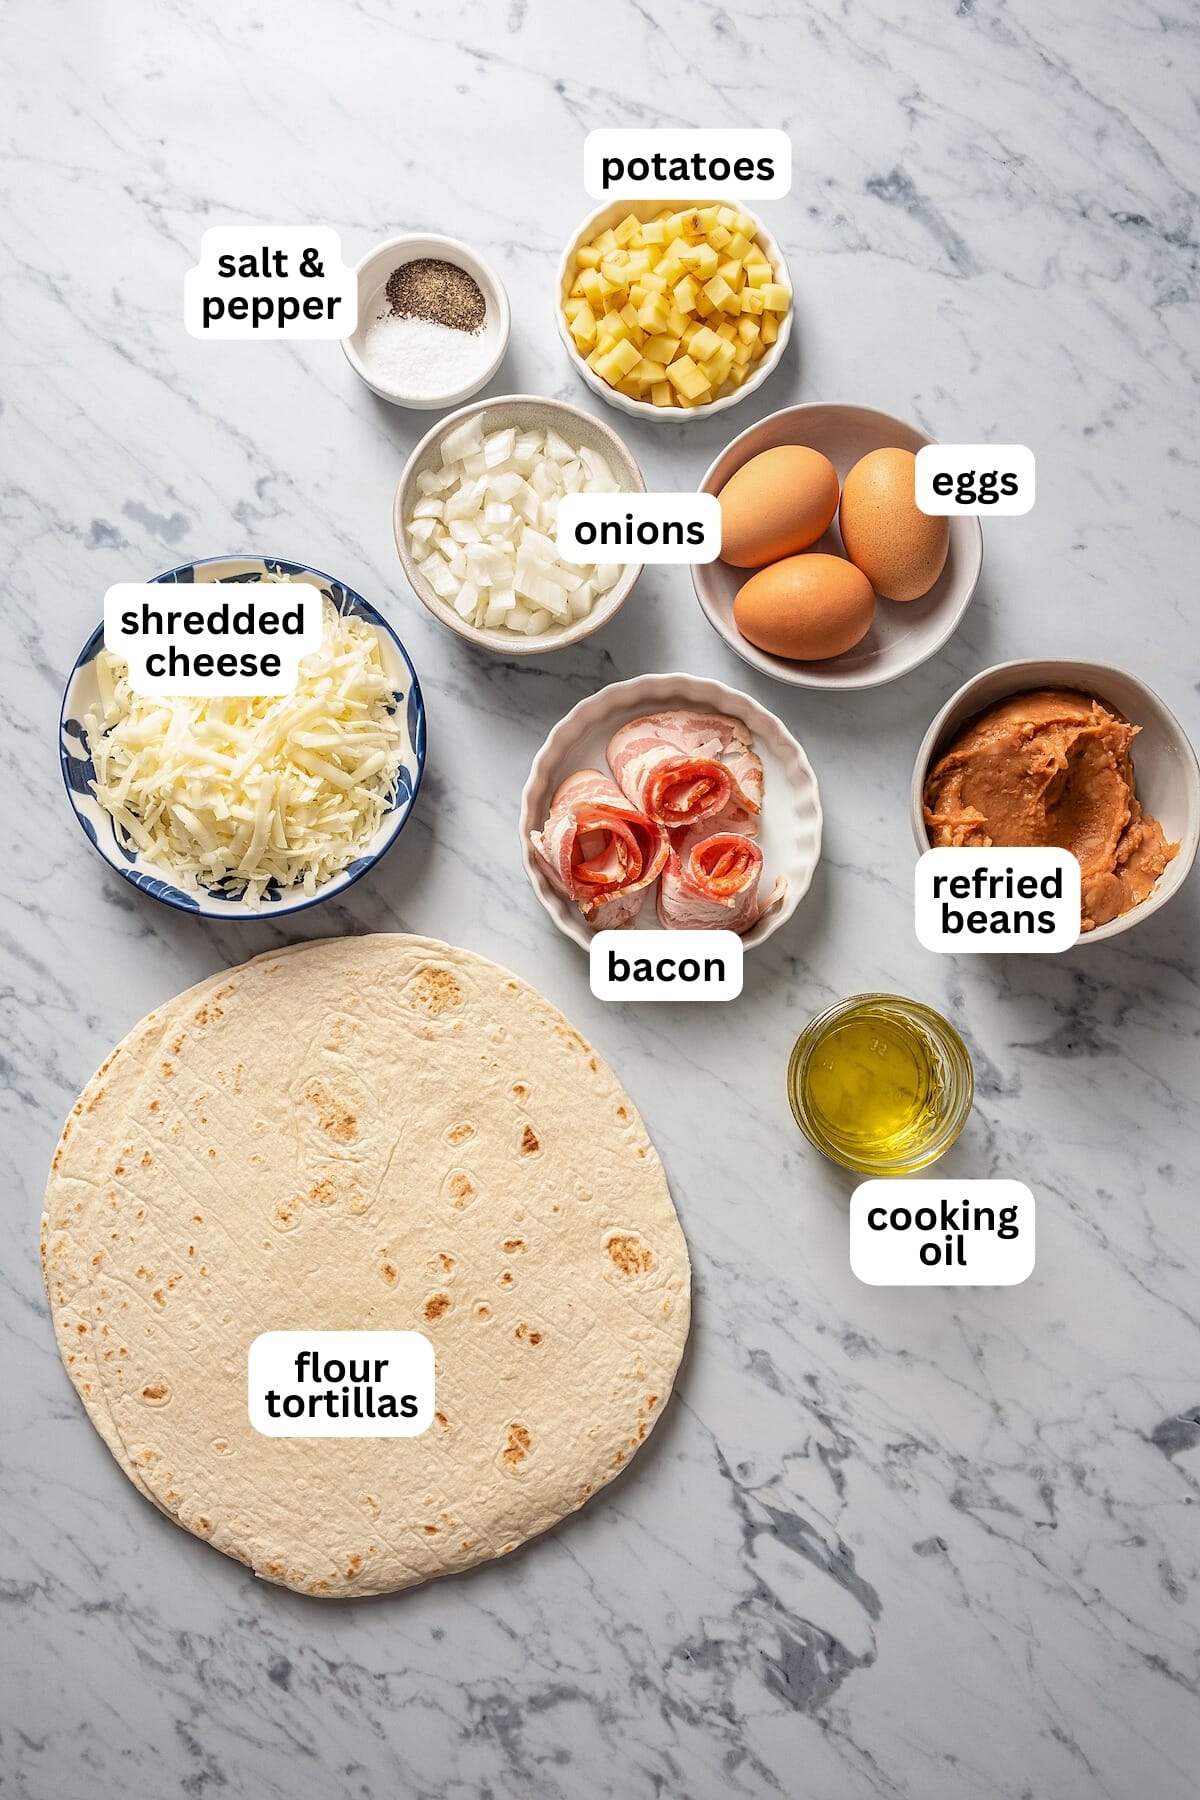 Image of all the ingredients needed to make breakfast quesadillas.